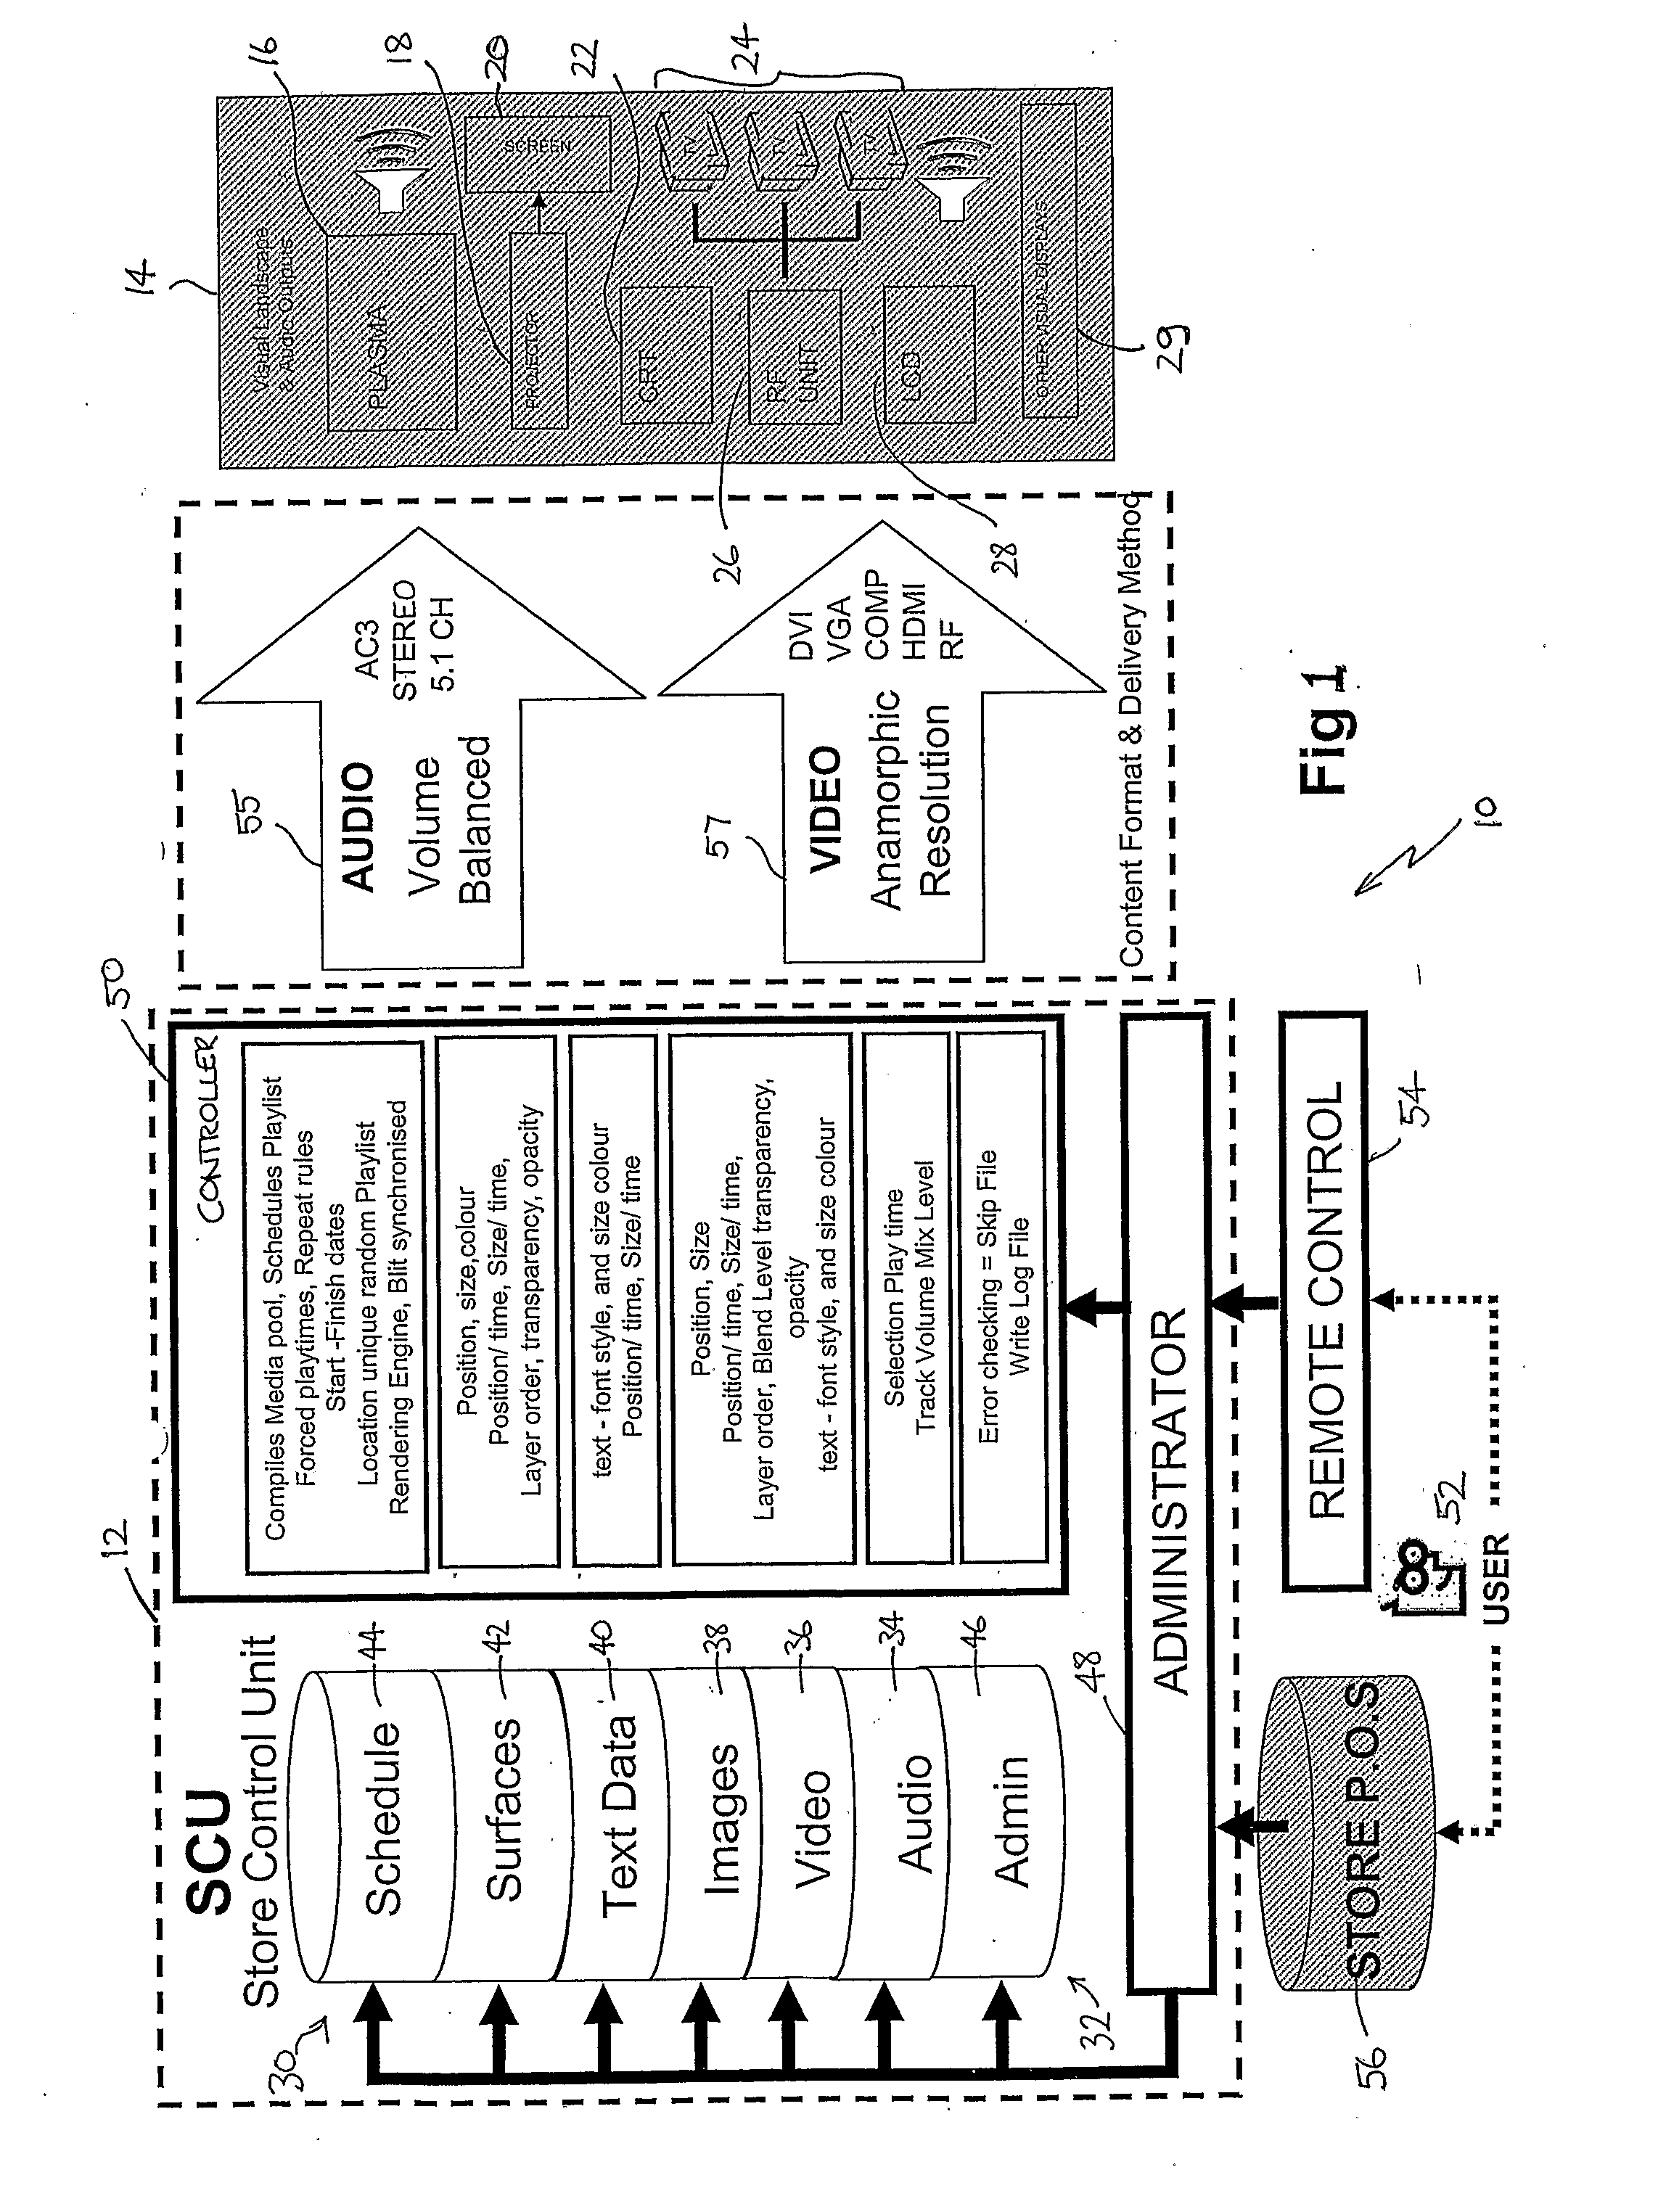 Presentation content management and creation systems and methods